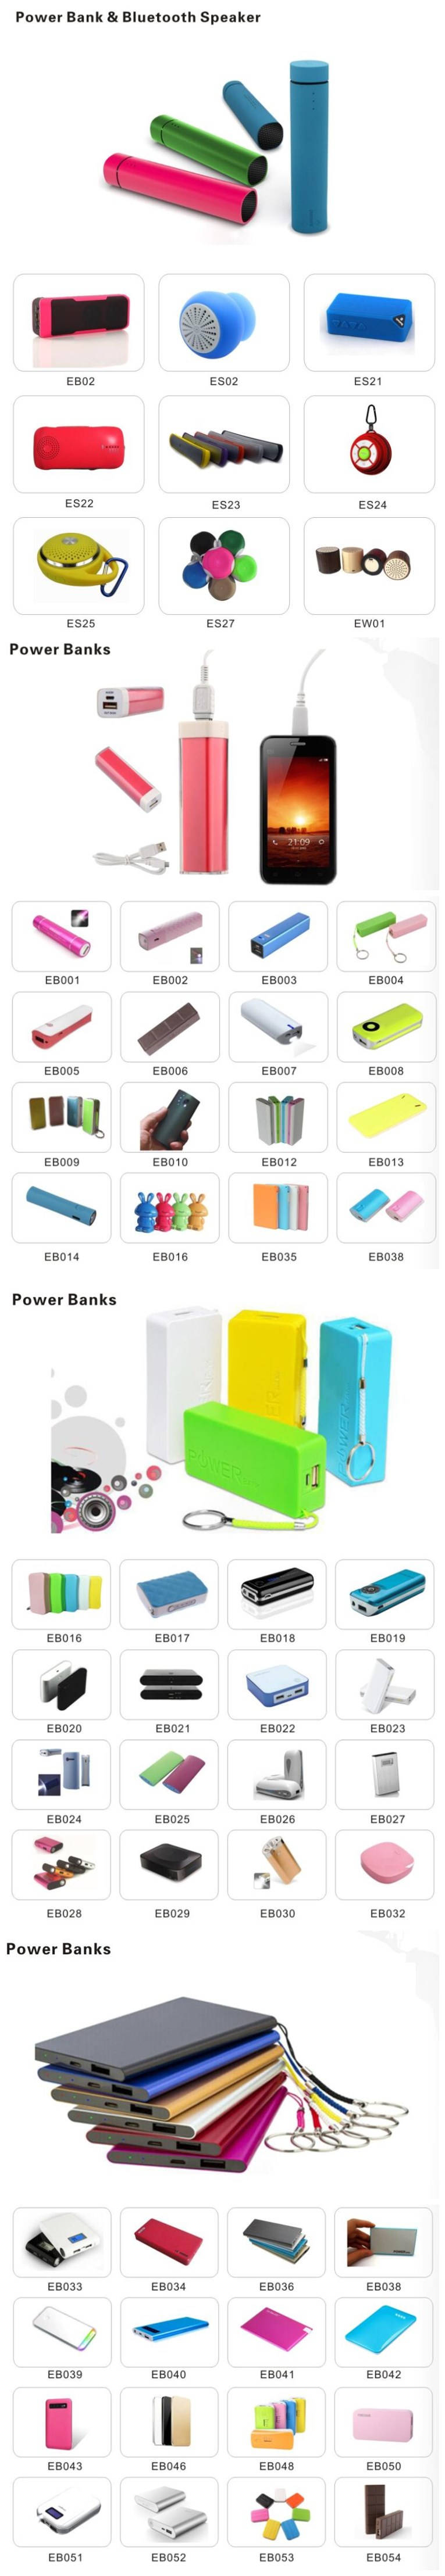 2016 New Mobile Power Bank Charger for Promotion